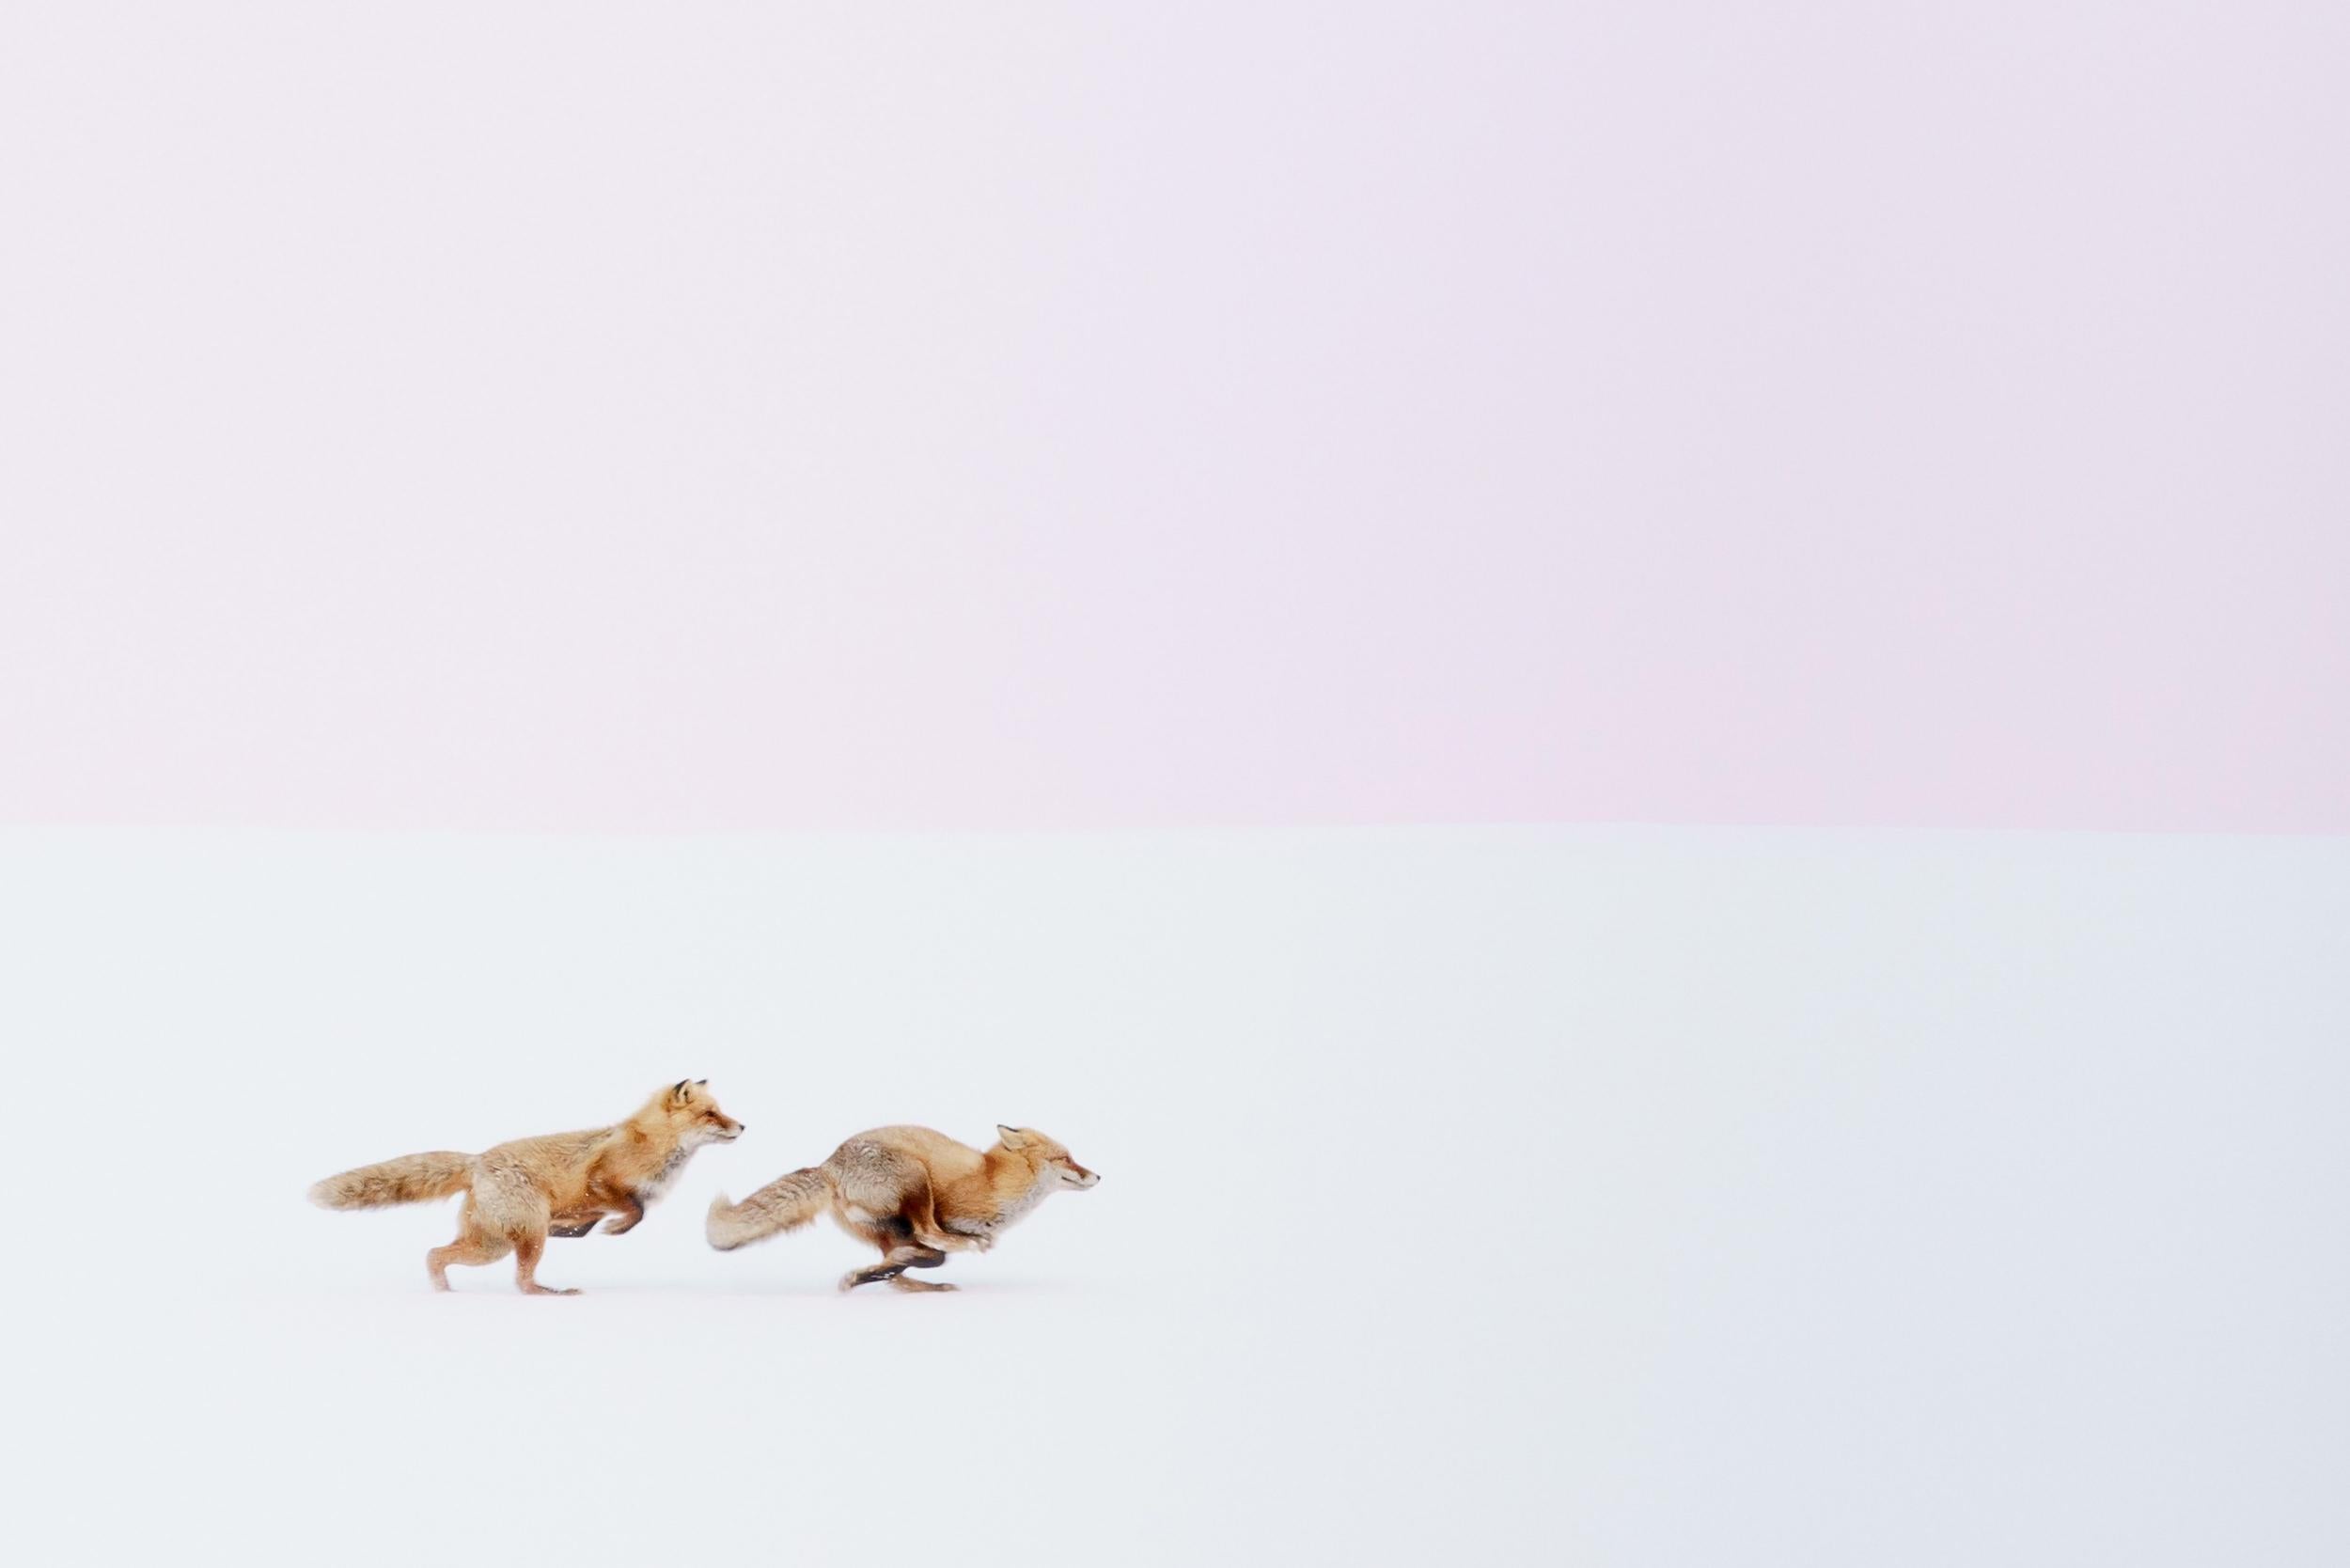 Foxes chase in the snow in Biei, Hokkaido, Japan